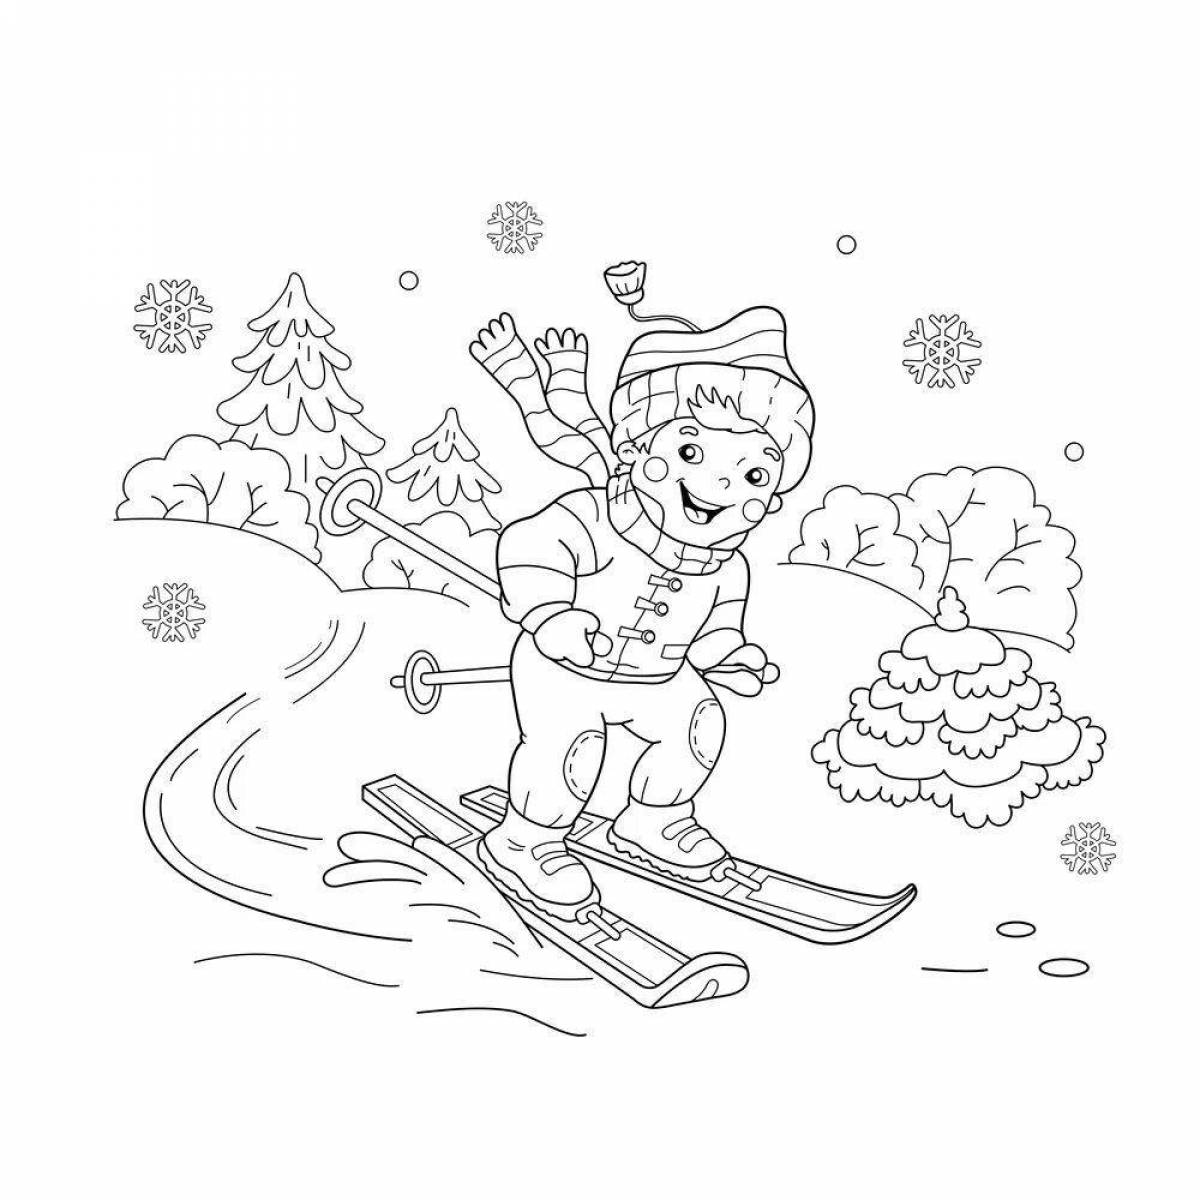 Elegant dhow winter sports coloring book